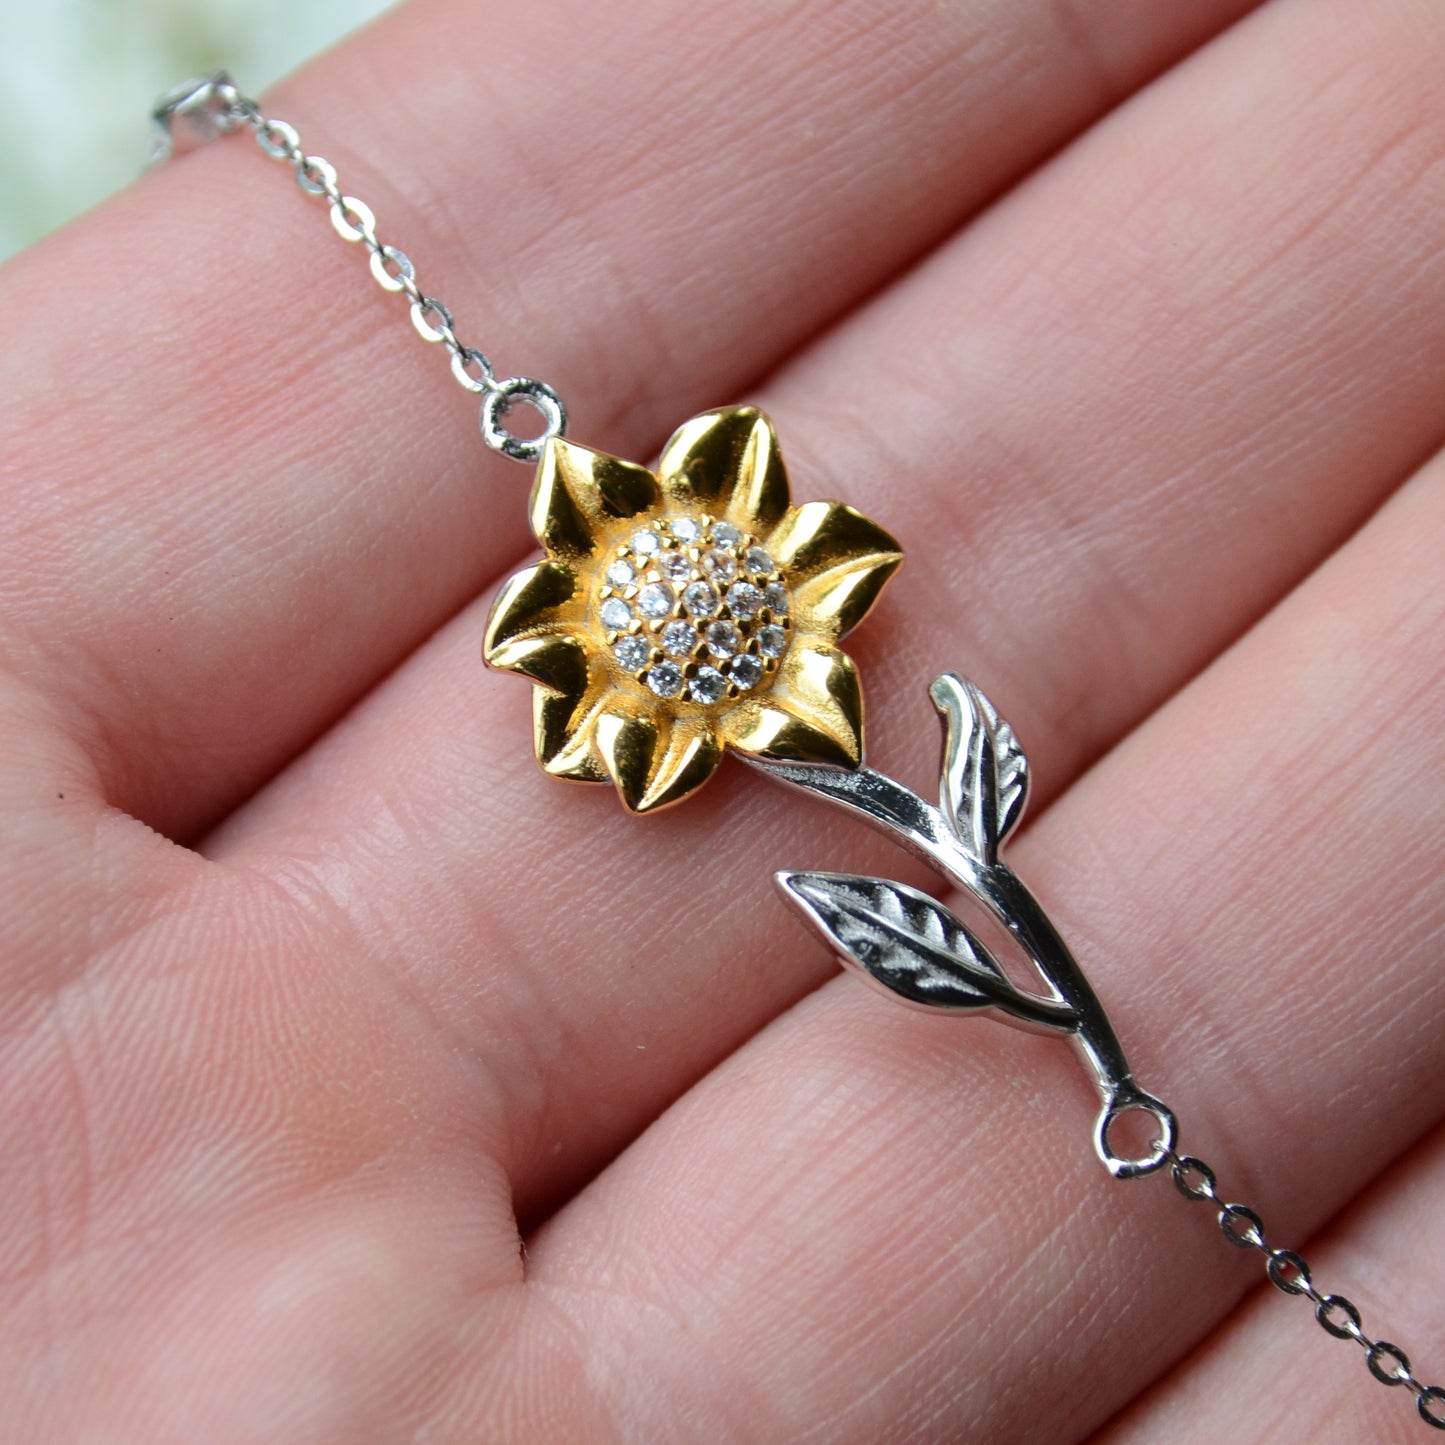 To Our Daughter on Her Graduation Day Sunflower Bracelet Gift from Mom and Dad, High School Grad Present, Class of 2022 College Jewelry